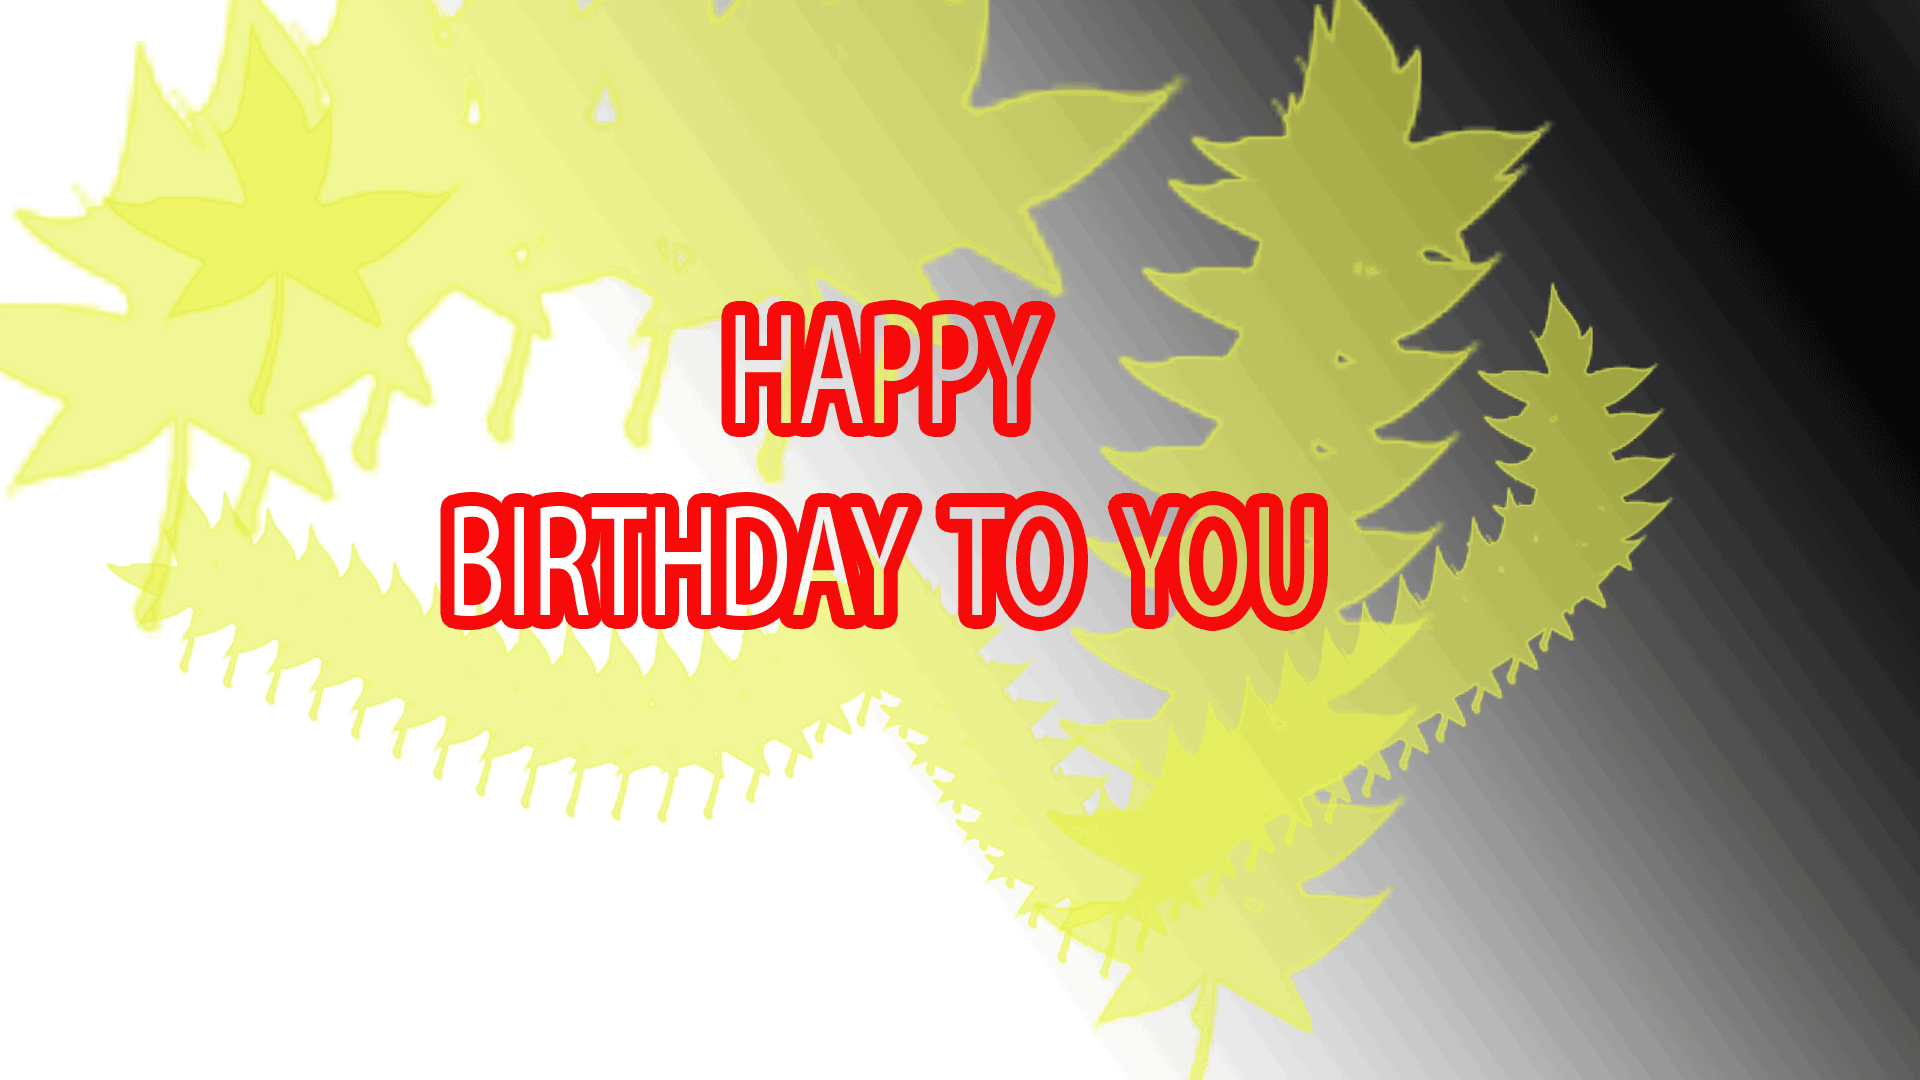 New happy birth day images and wallpapers 2019 free download